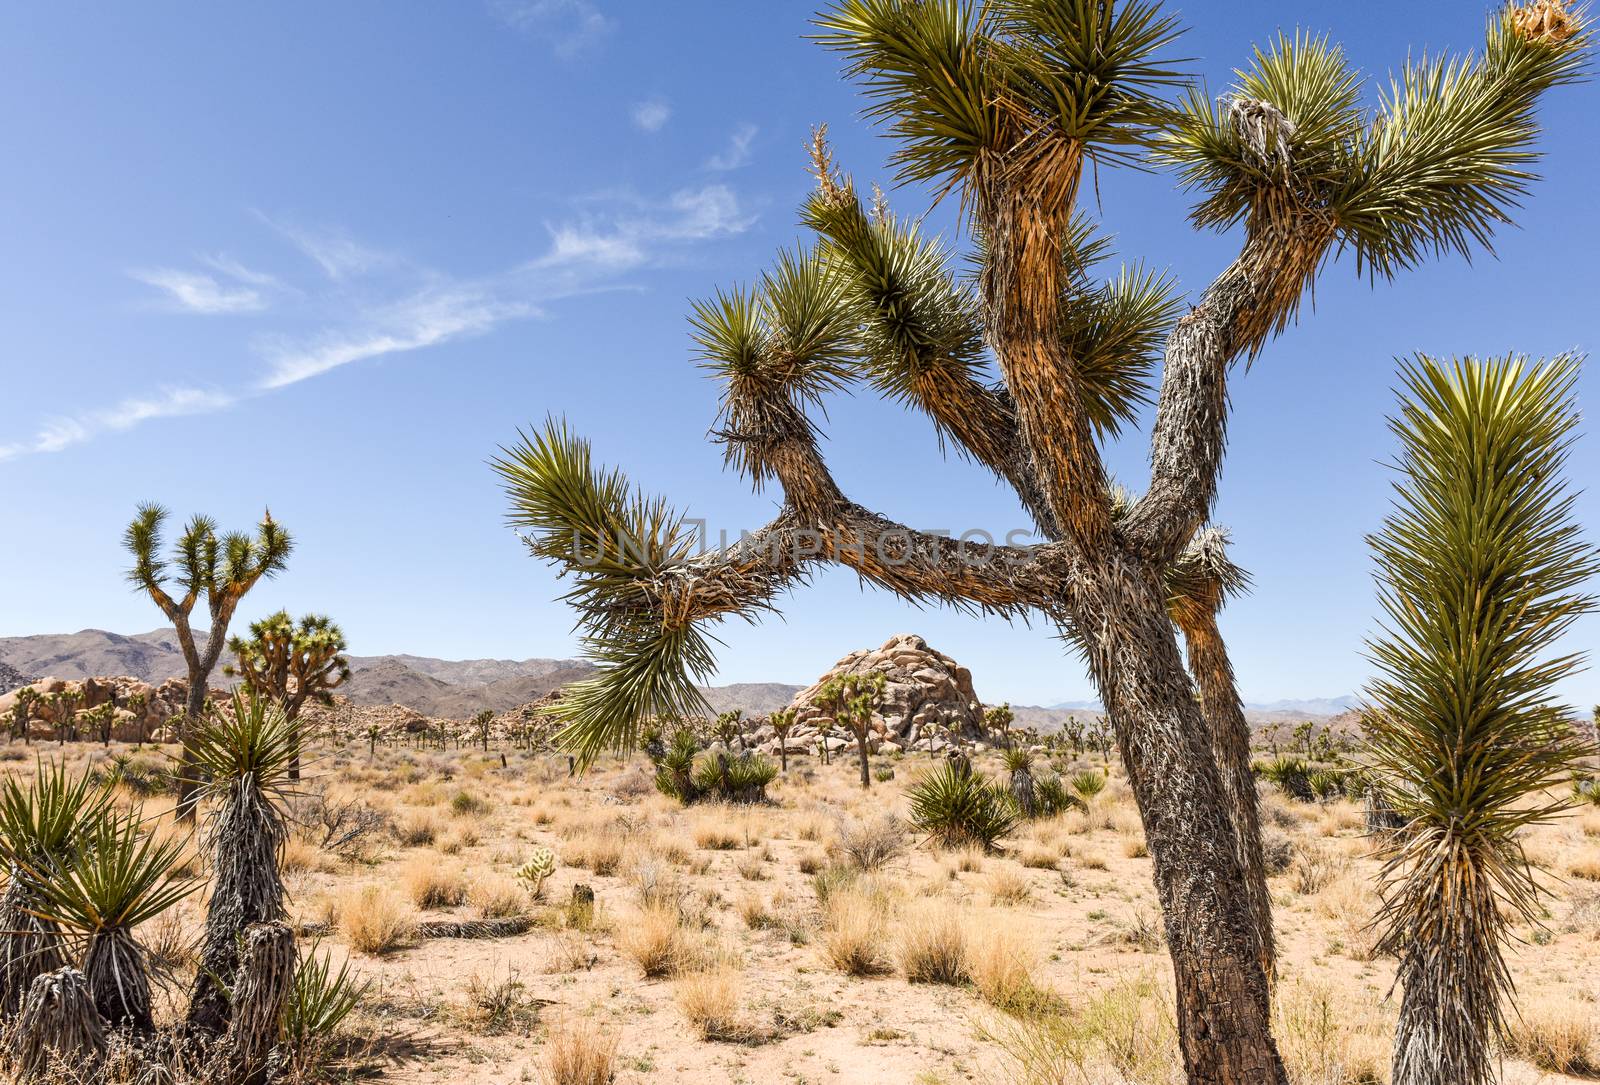 Joshua trees (Yucca brevifolia) on Boy Scout Trail in Joshua Tre by Njean